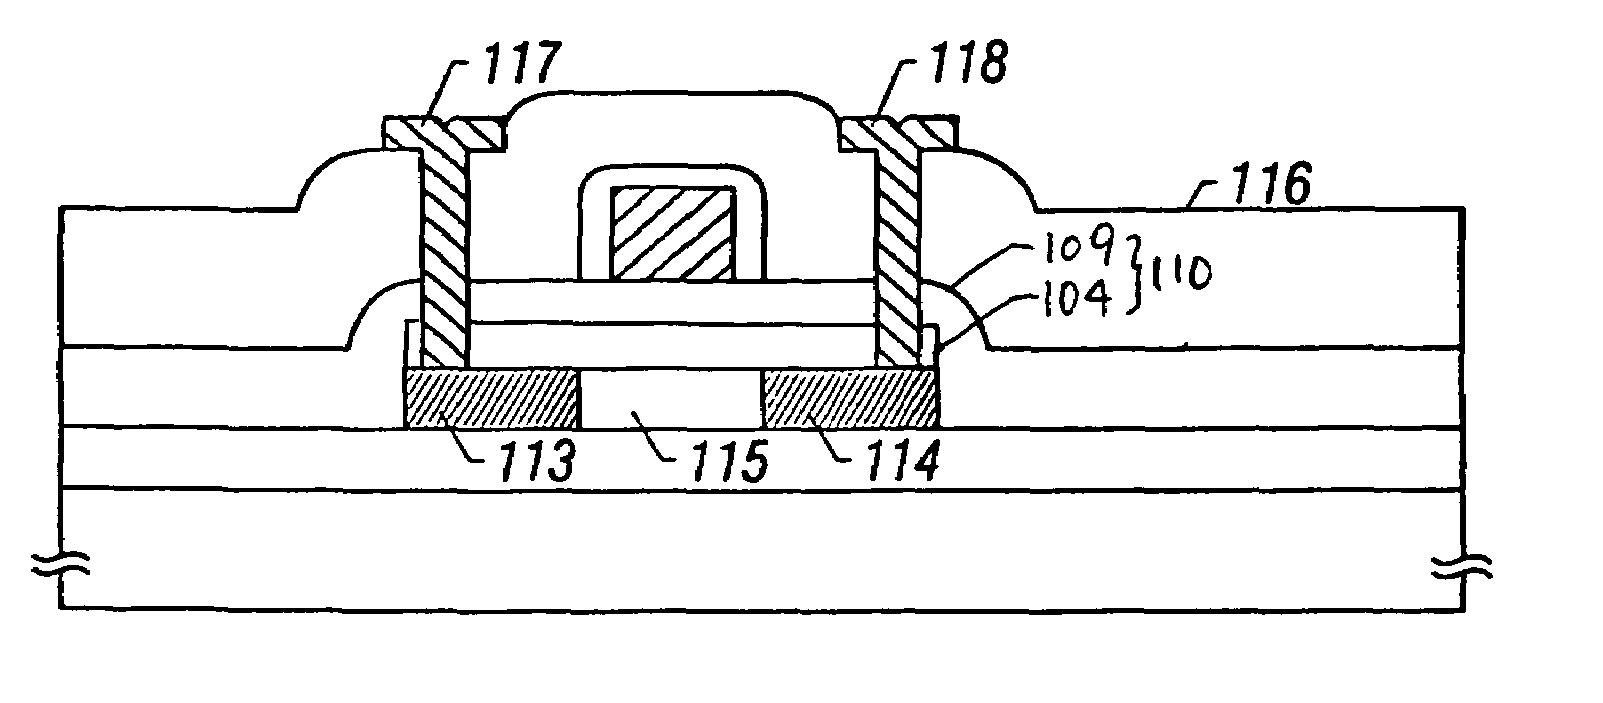 Method of fabricating semiconductor devices